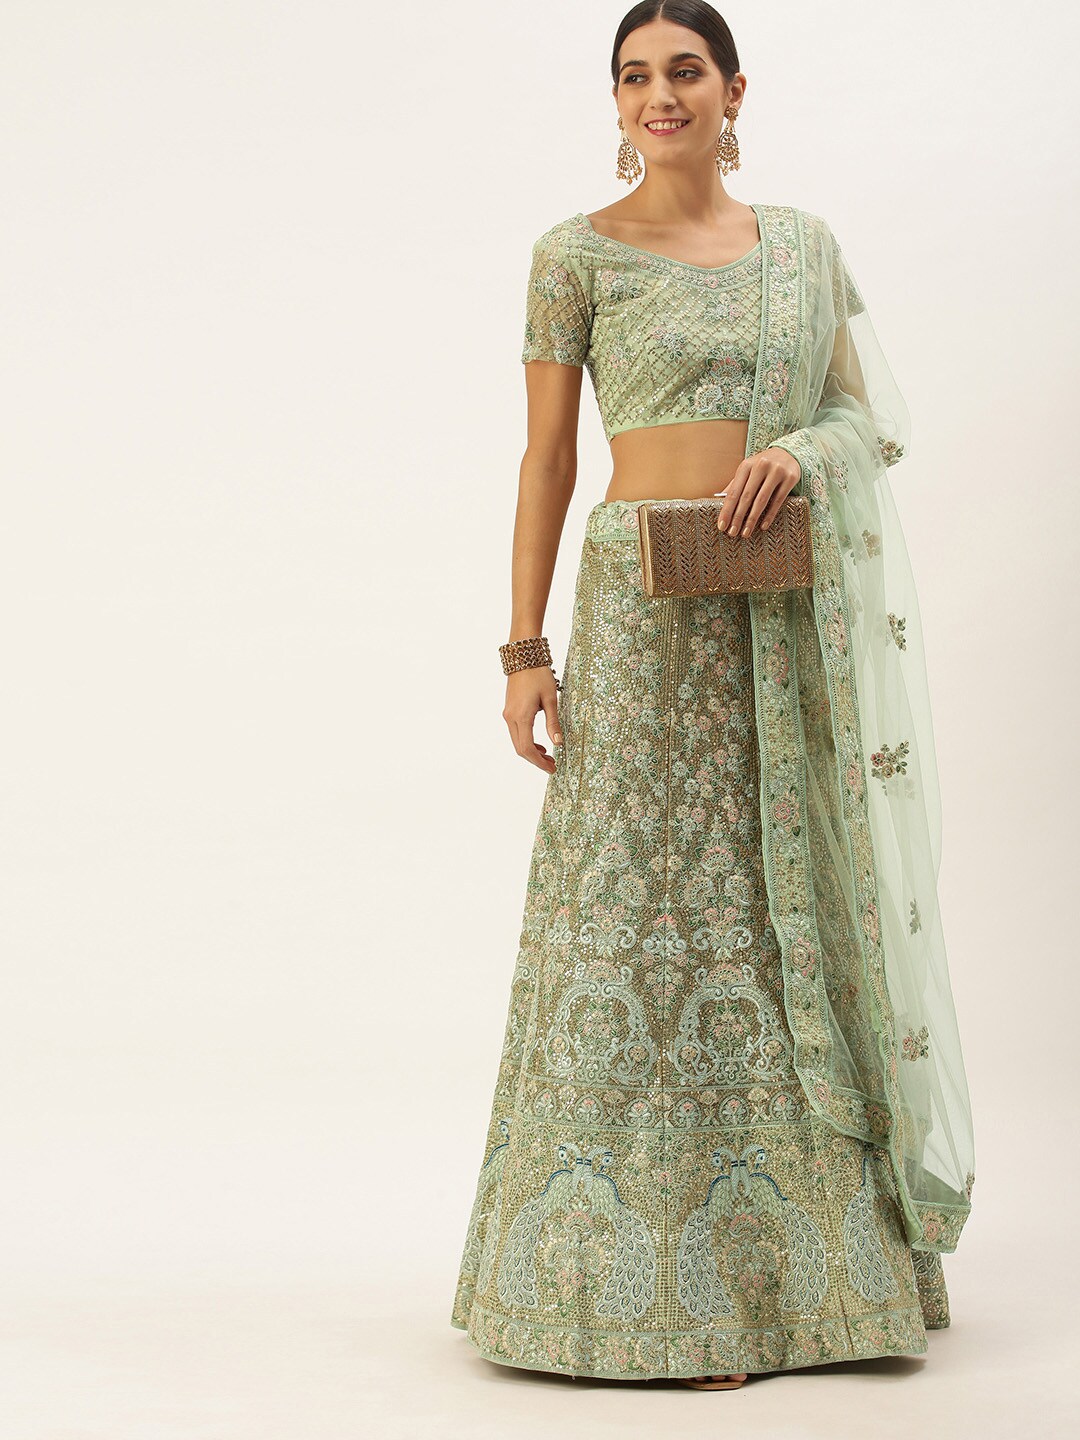 LADUSAA Women Mint Green & Pink Embroidered Semi-Stitched Lehenga & Blouse with Dupatta Price in India